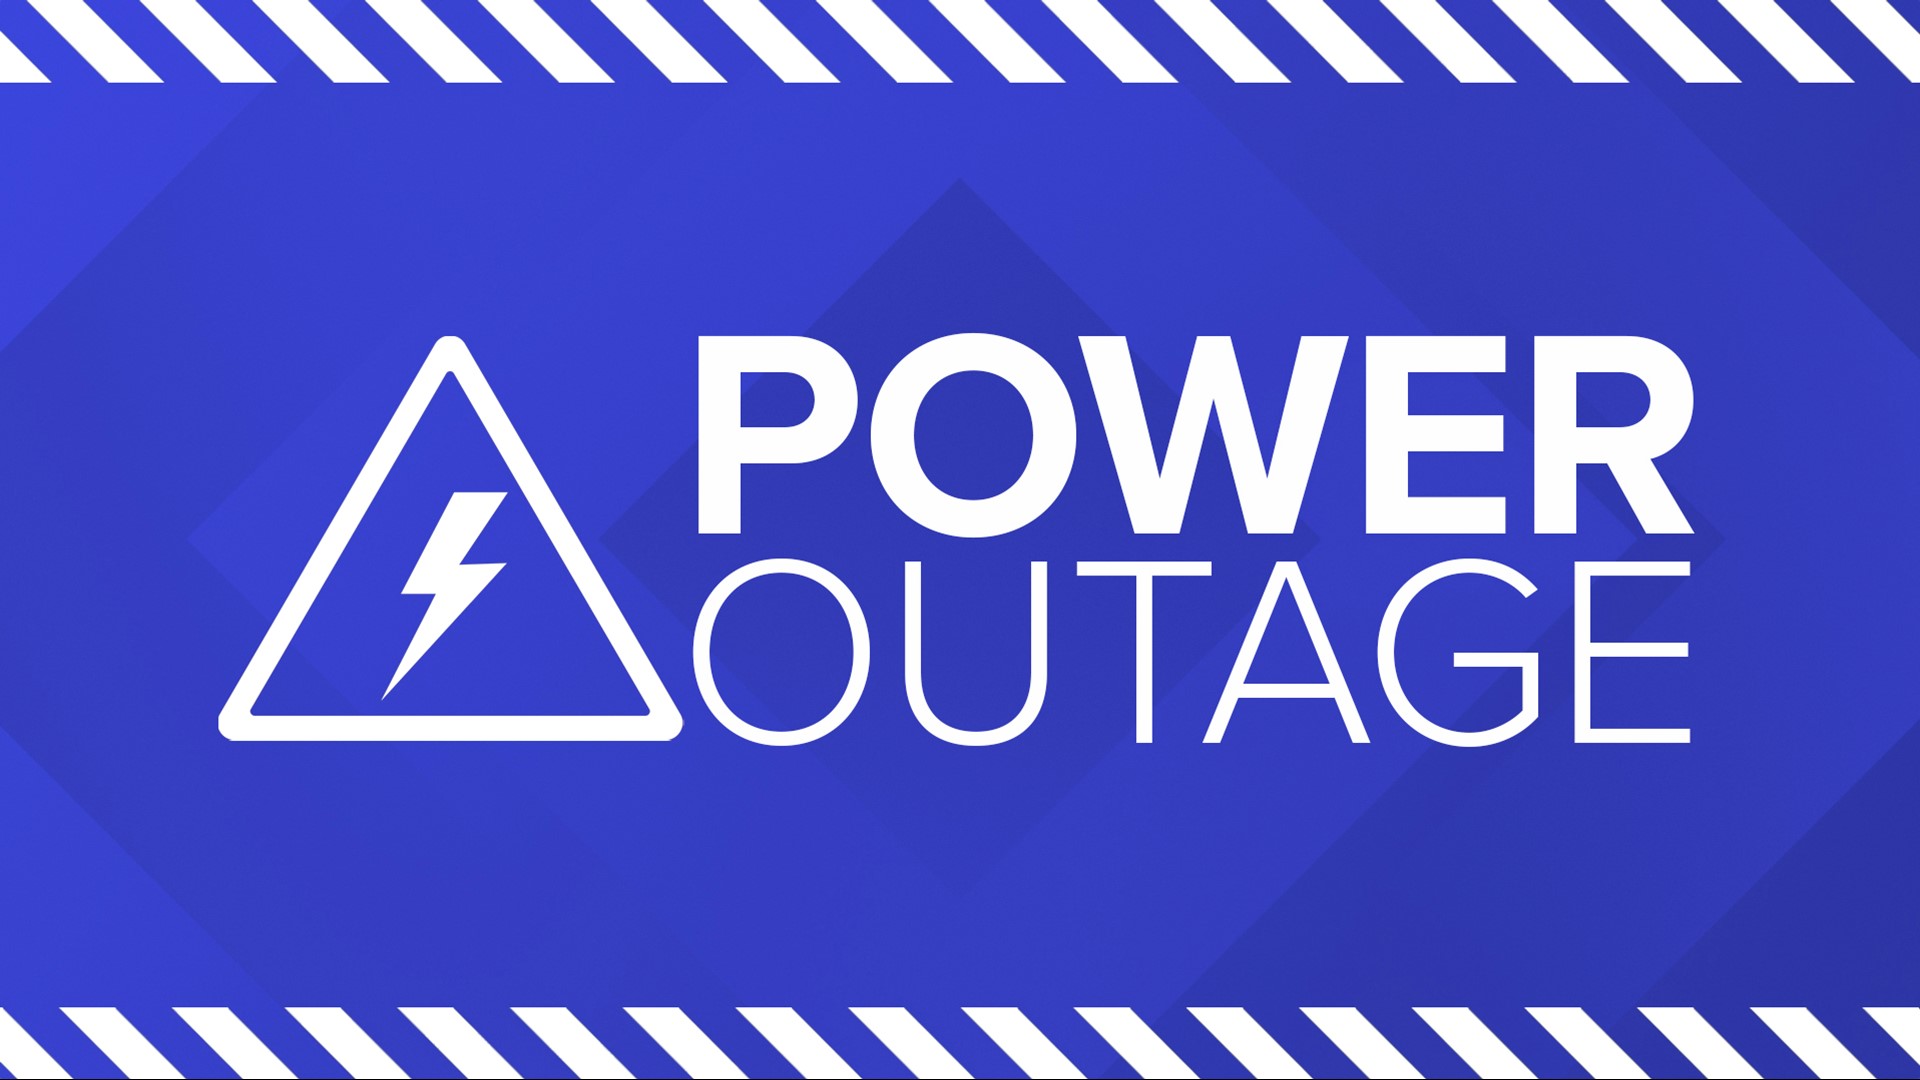 A mobile substation is being brought in to assist those without power and will likely not become operational until later this evening, around 11:30 p.m.